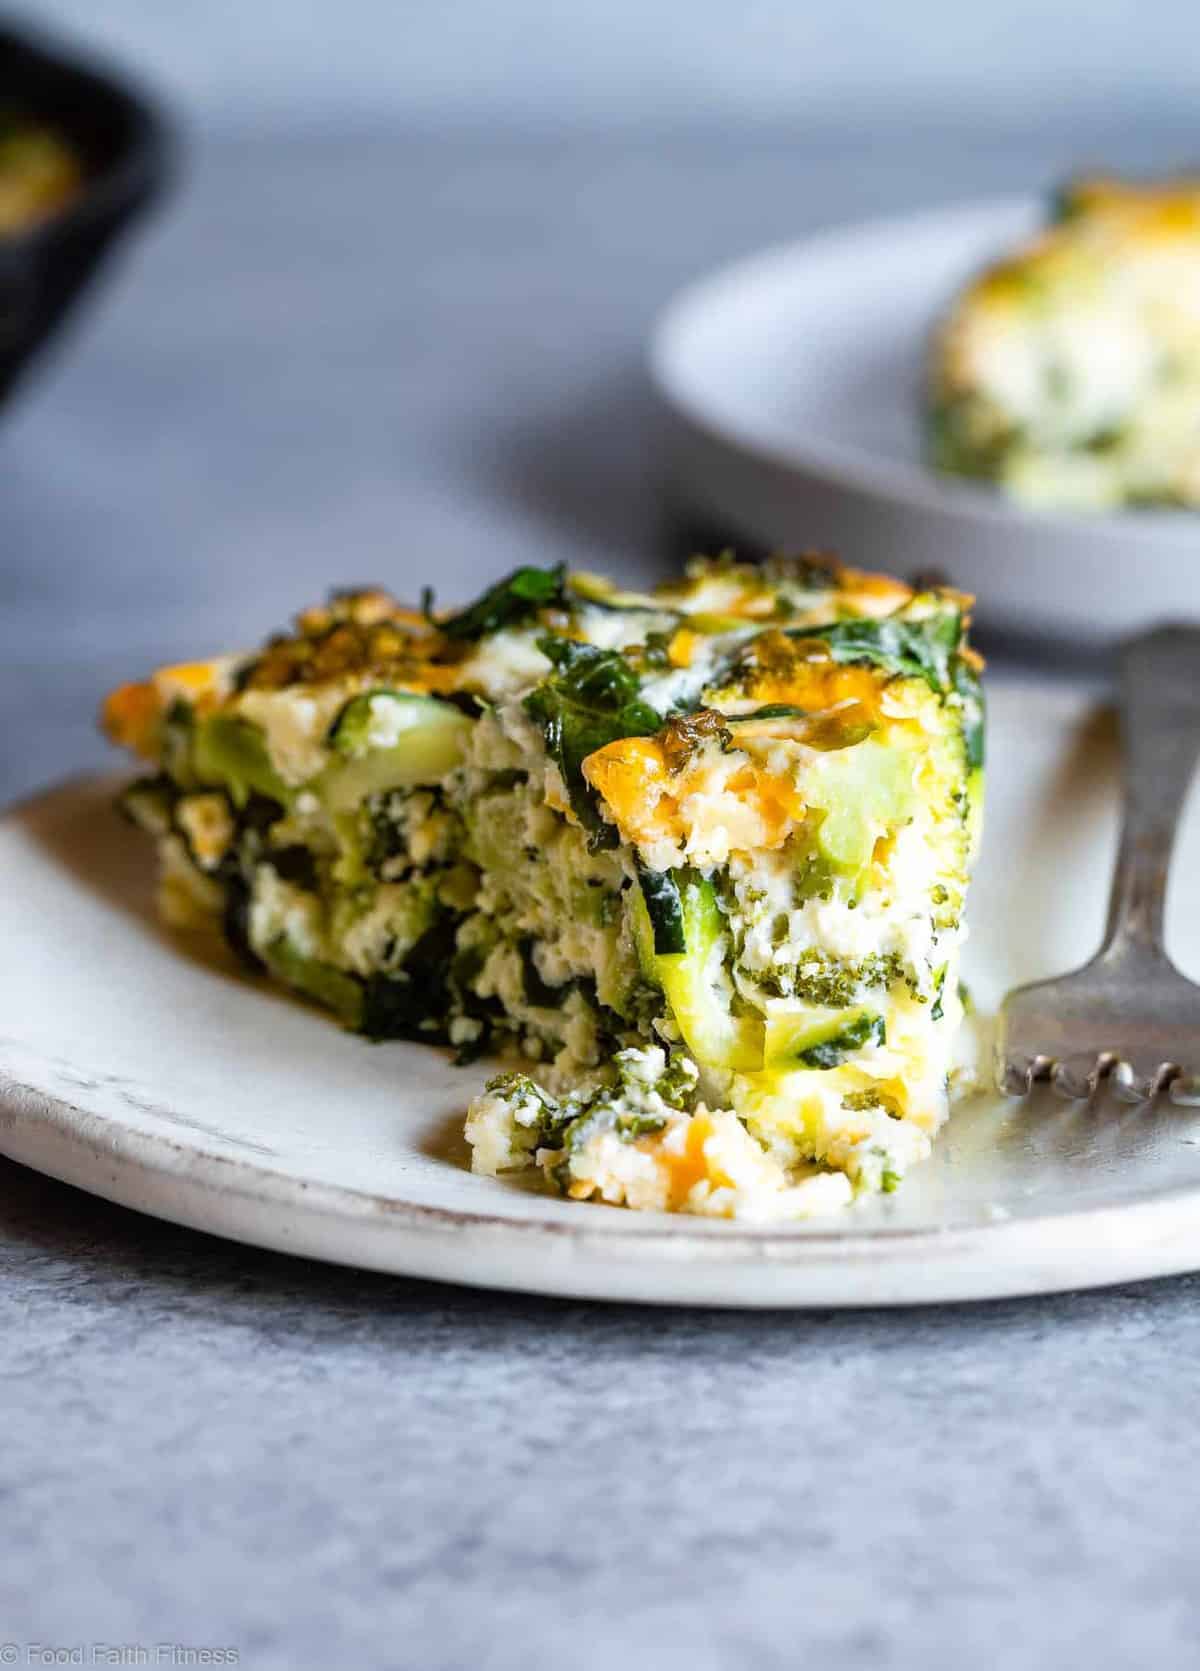 Baked Kale and Broccoli Cheesy Zucchini Casserole -Â This low carb, gluten freeÂ Healthy Baked Cheesy Zucchini Casserole is a quick, easy and healthy dinner that even your kids will love! Protein packed, only 1 Freestyle point and 167 calories too! | #Foodfaithfitness | #Lowcarb #Keto #Glutenfree #Spiralized #Healthy